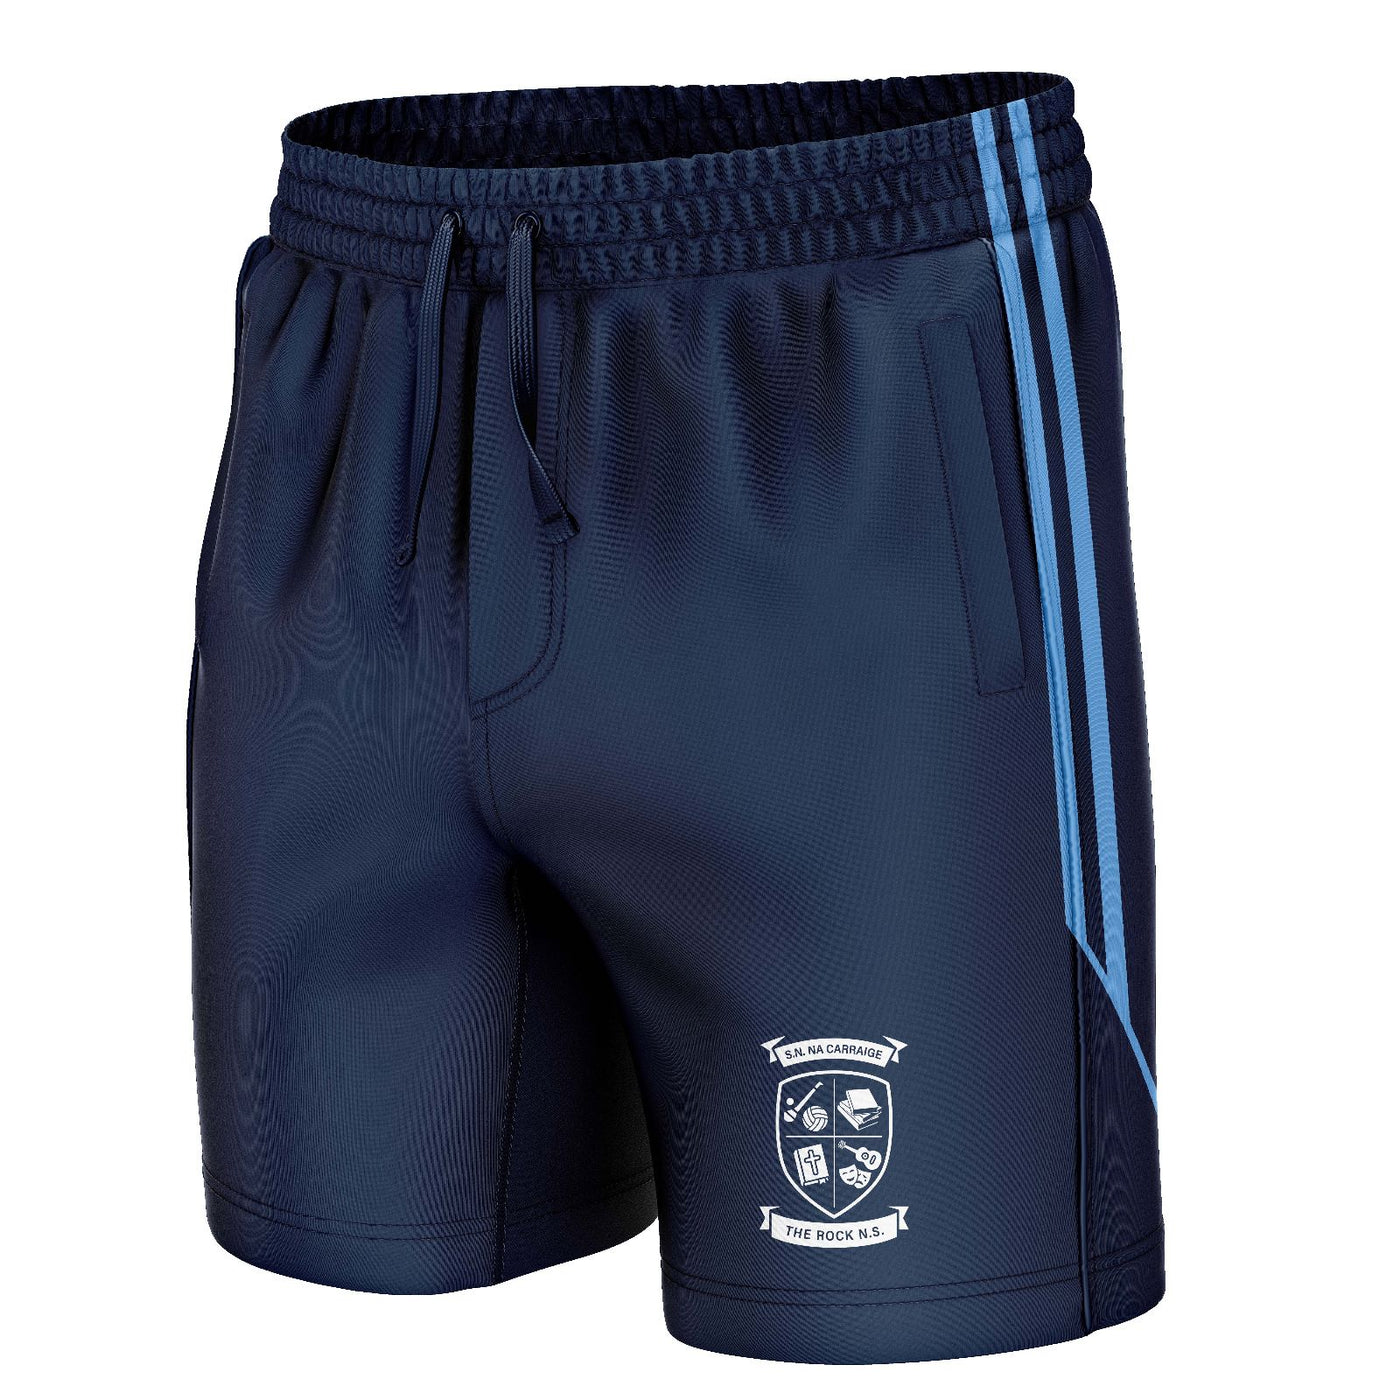 The Rock NS - Leisure Shorts